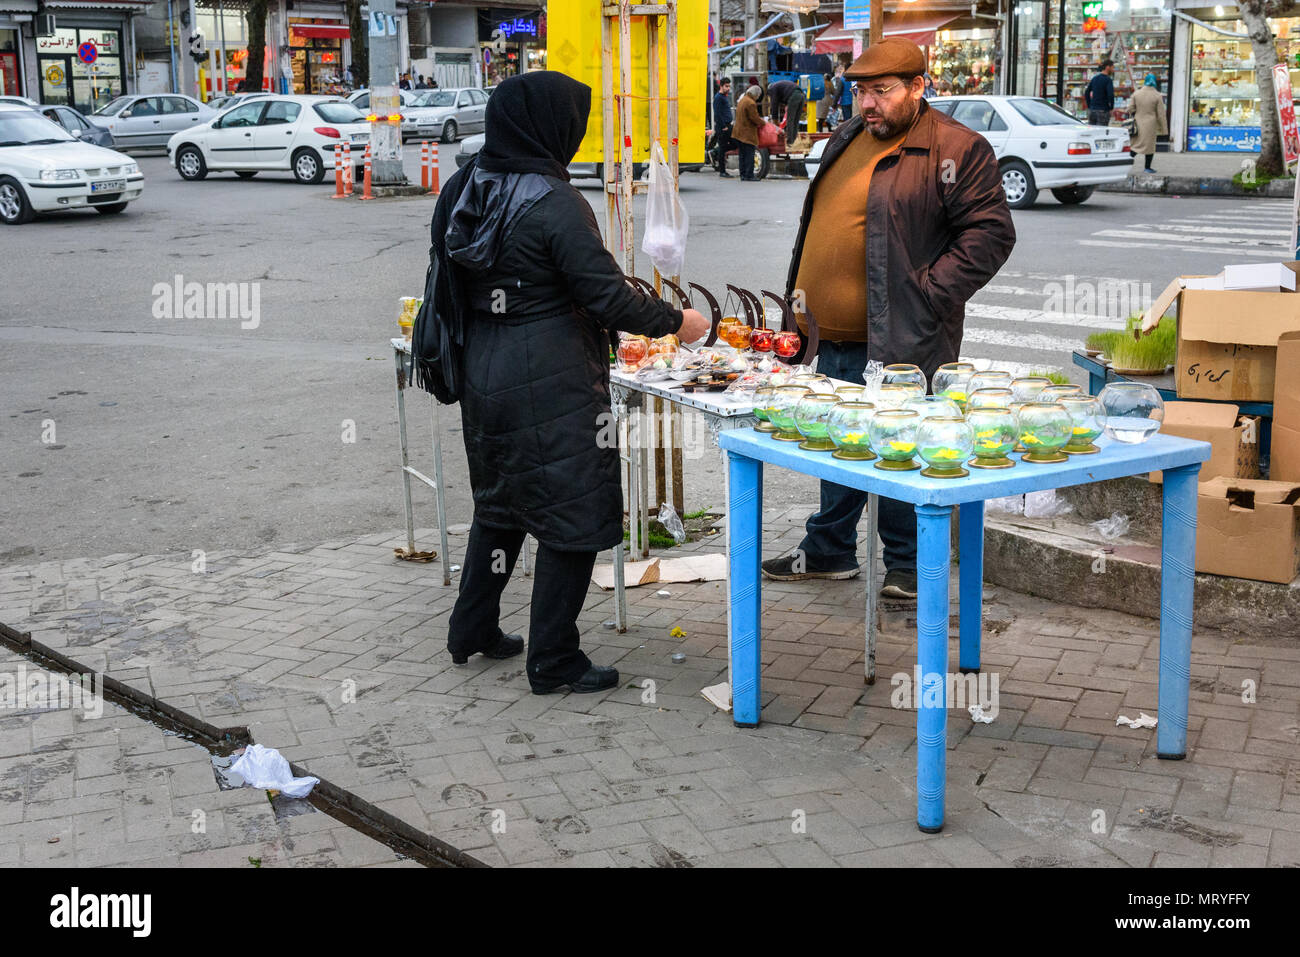 Astara, Gilan Province, Iran - March 13, 2018: Street vendors sell traditional items to celebrate the Persian new year Nowruz Stock Photo